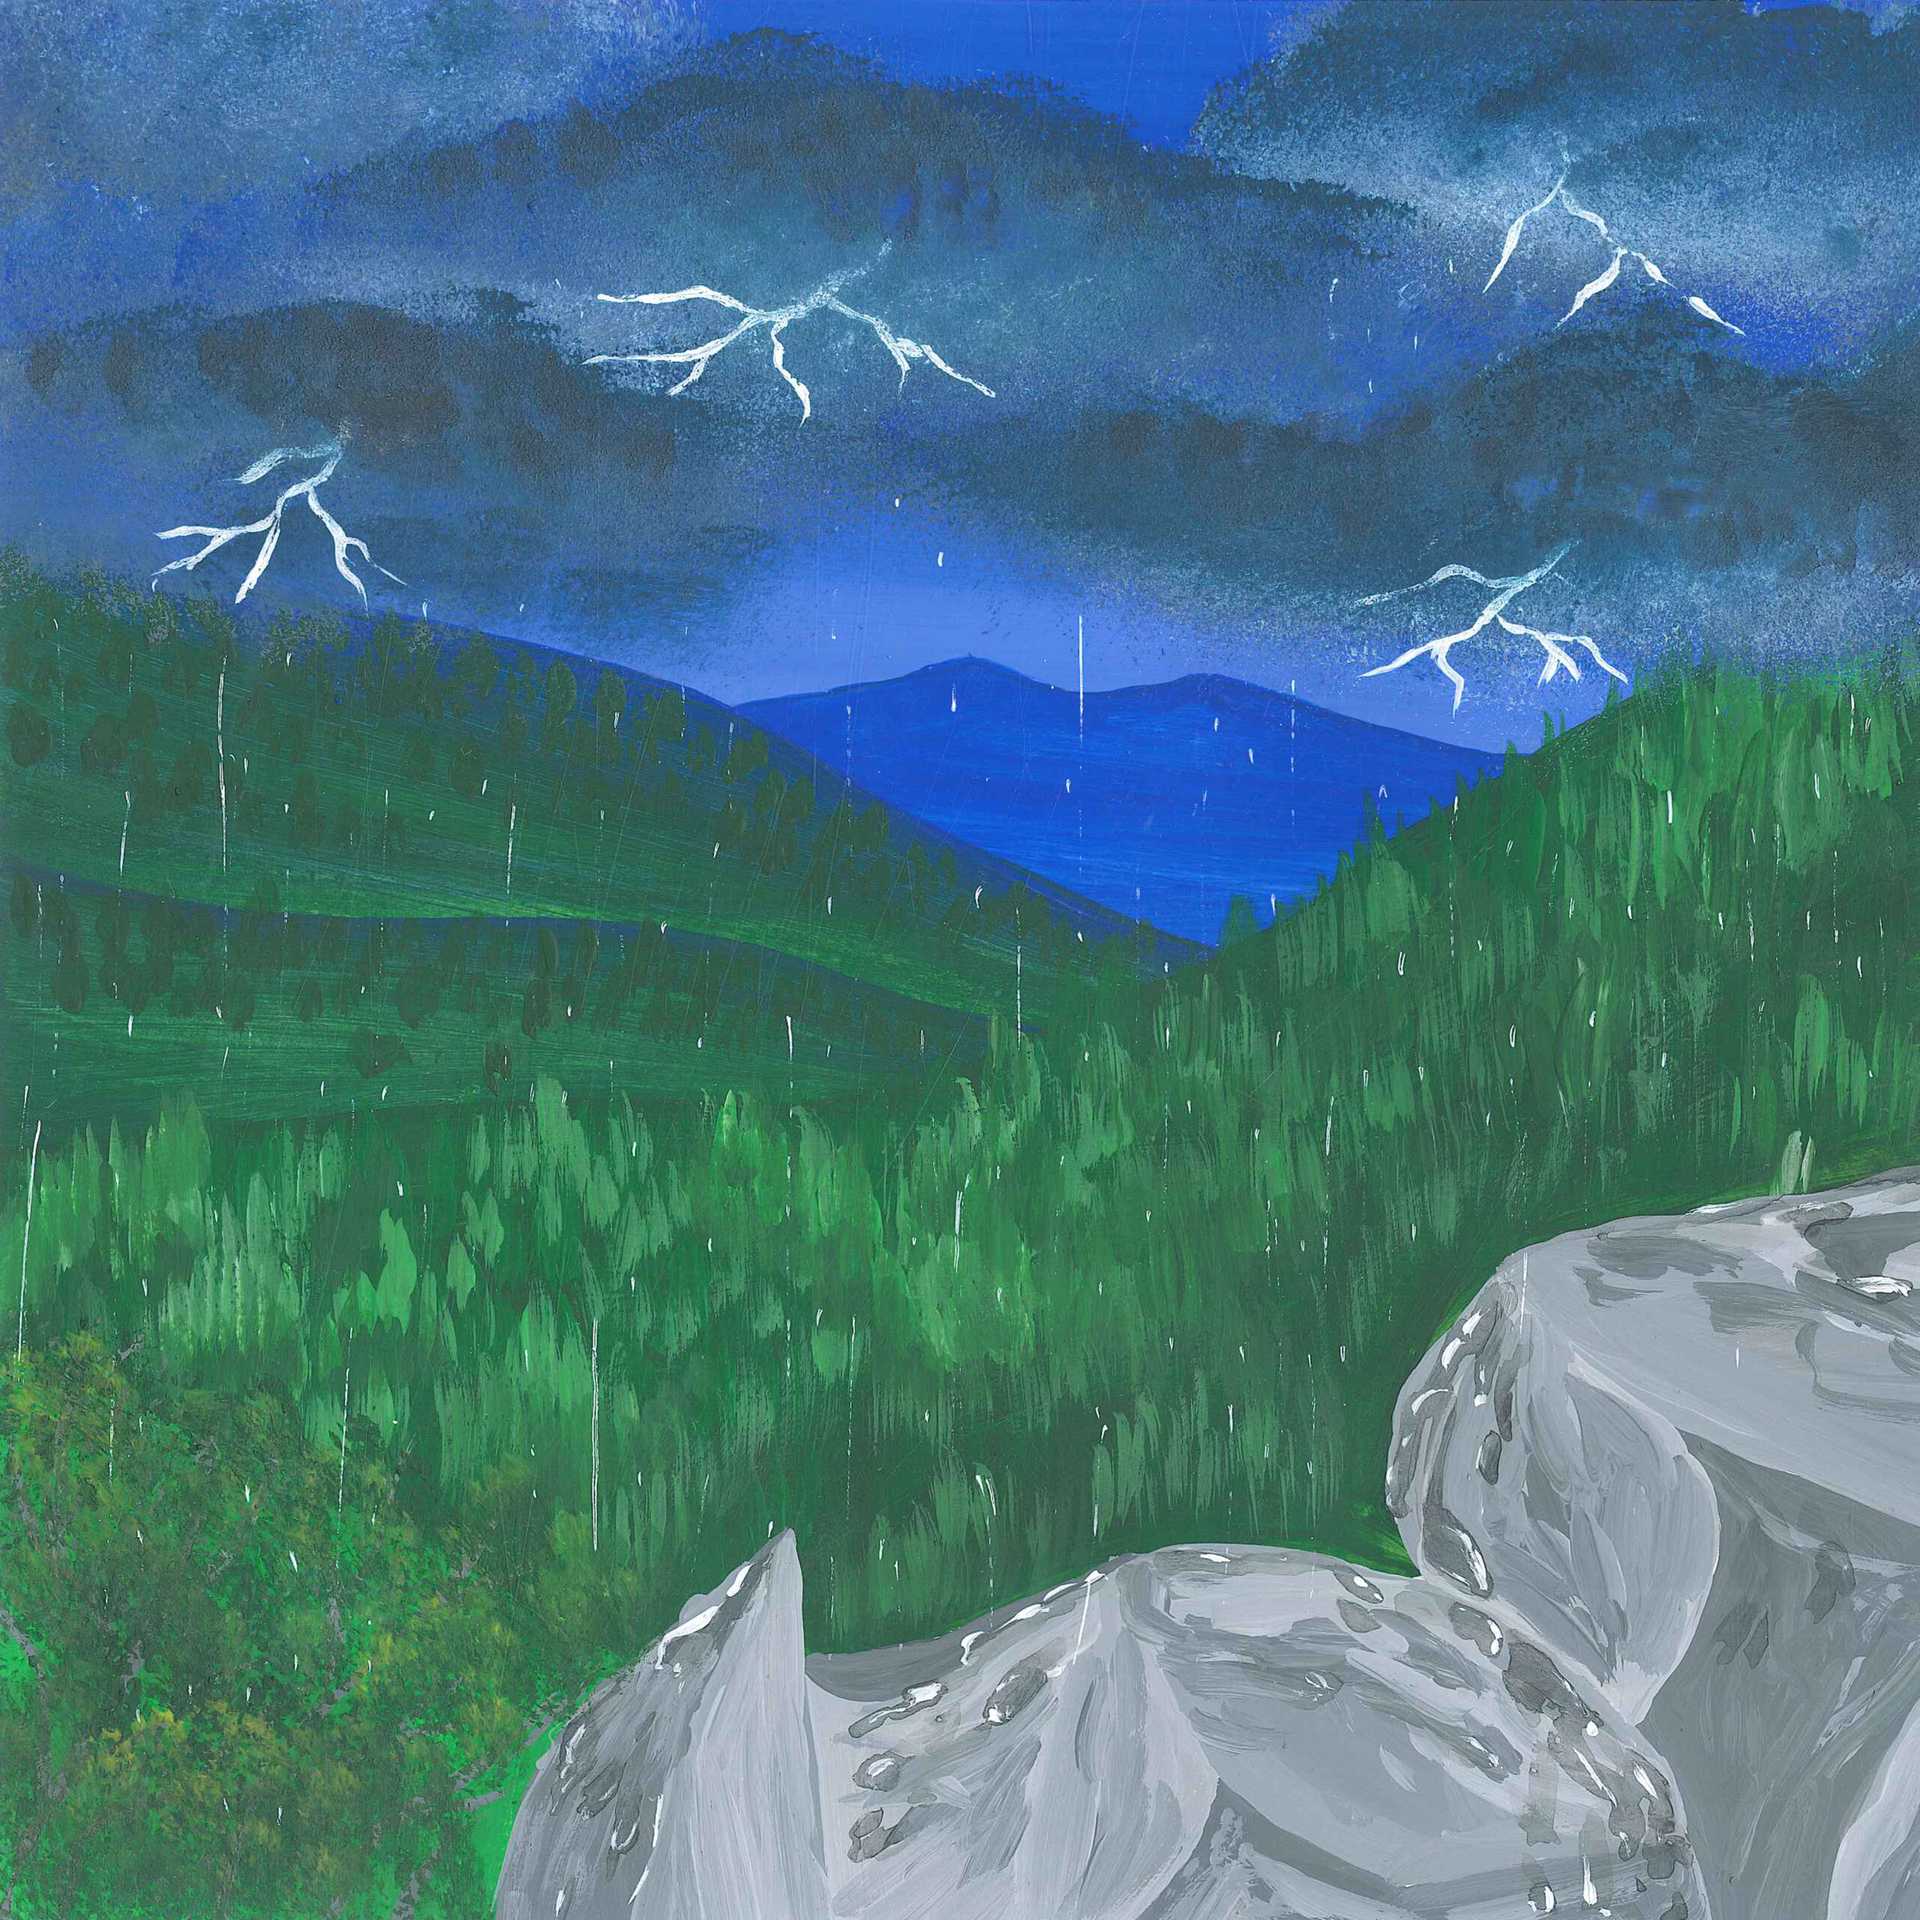 A Spring Thunderstorm in a Beech Forest - nature landscape painting - earth.fm